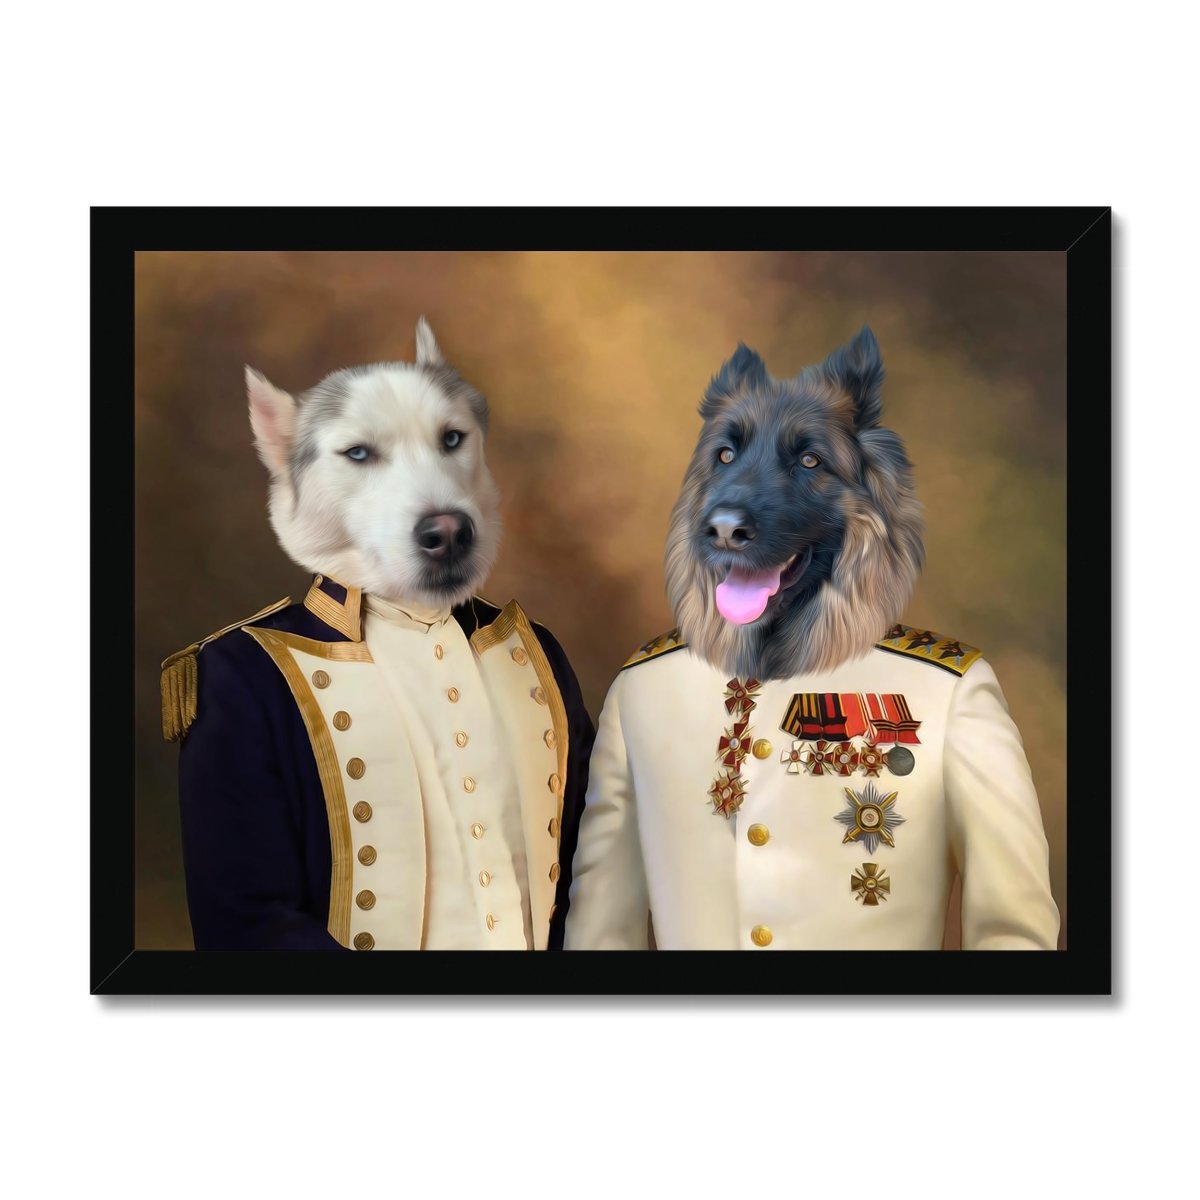 The Admiral & The Sargent: Custom Pet Canvas - Paw & Glory - #pet portraits# - #dog portraits# - #pet portraits uk#paw and glory, pet portraits canvas,dog canvas, personalized dog and owner canvas uk, pet canvas uk, canvas of my dog, dog canvas wall art